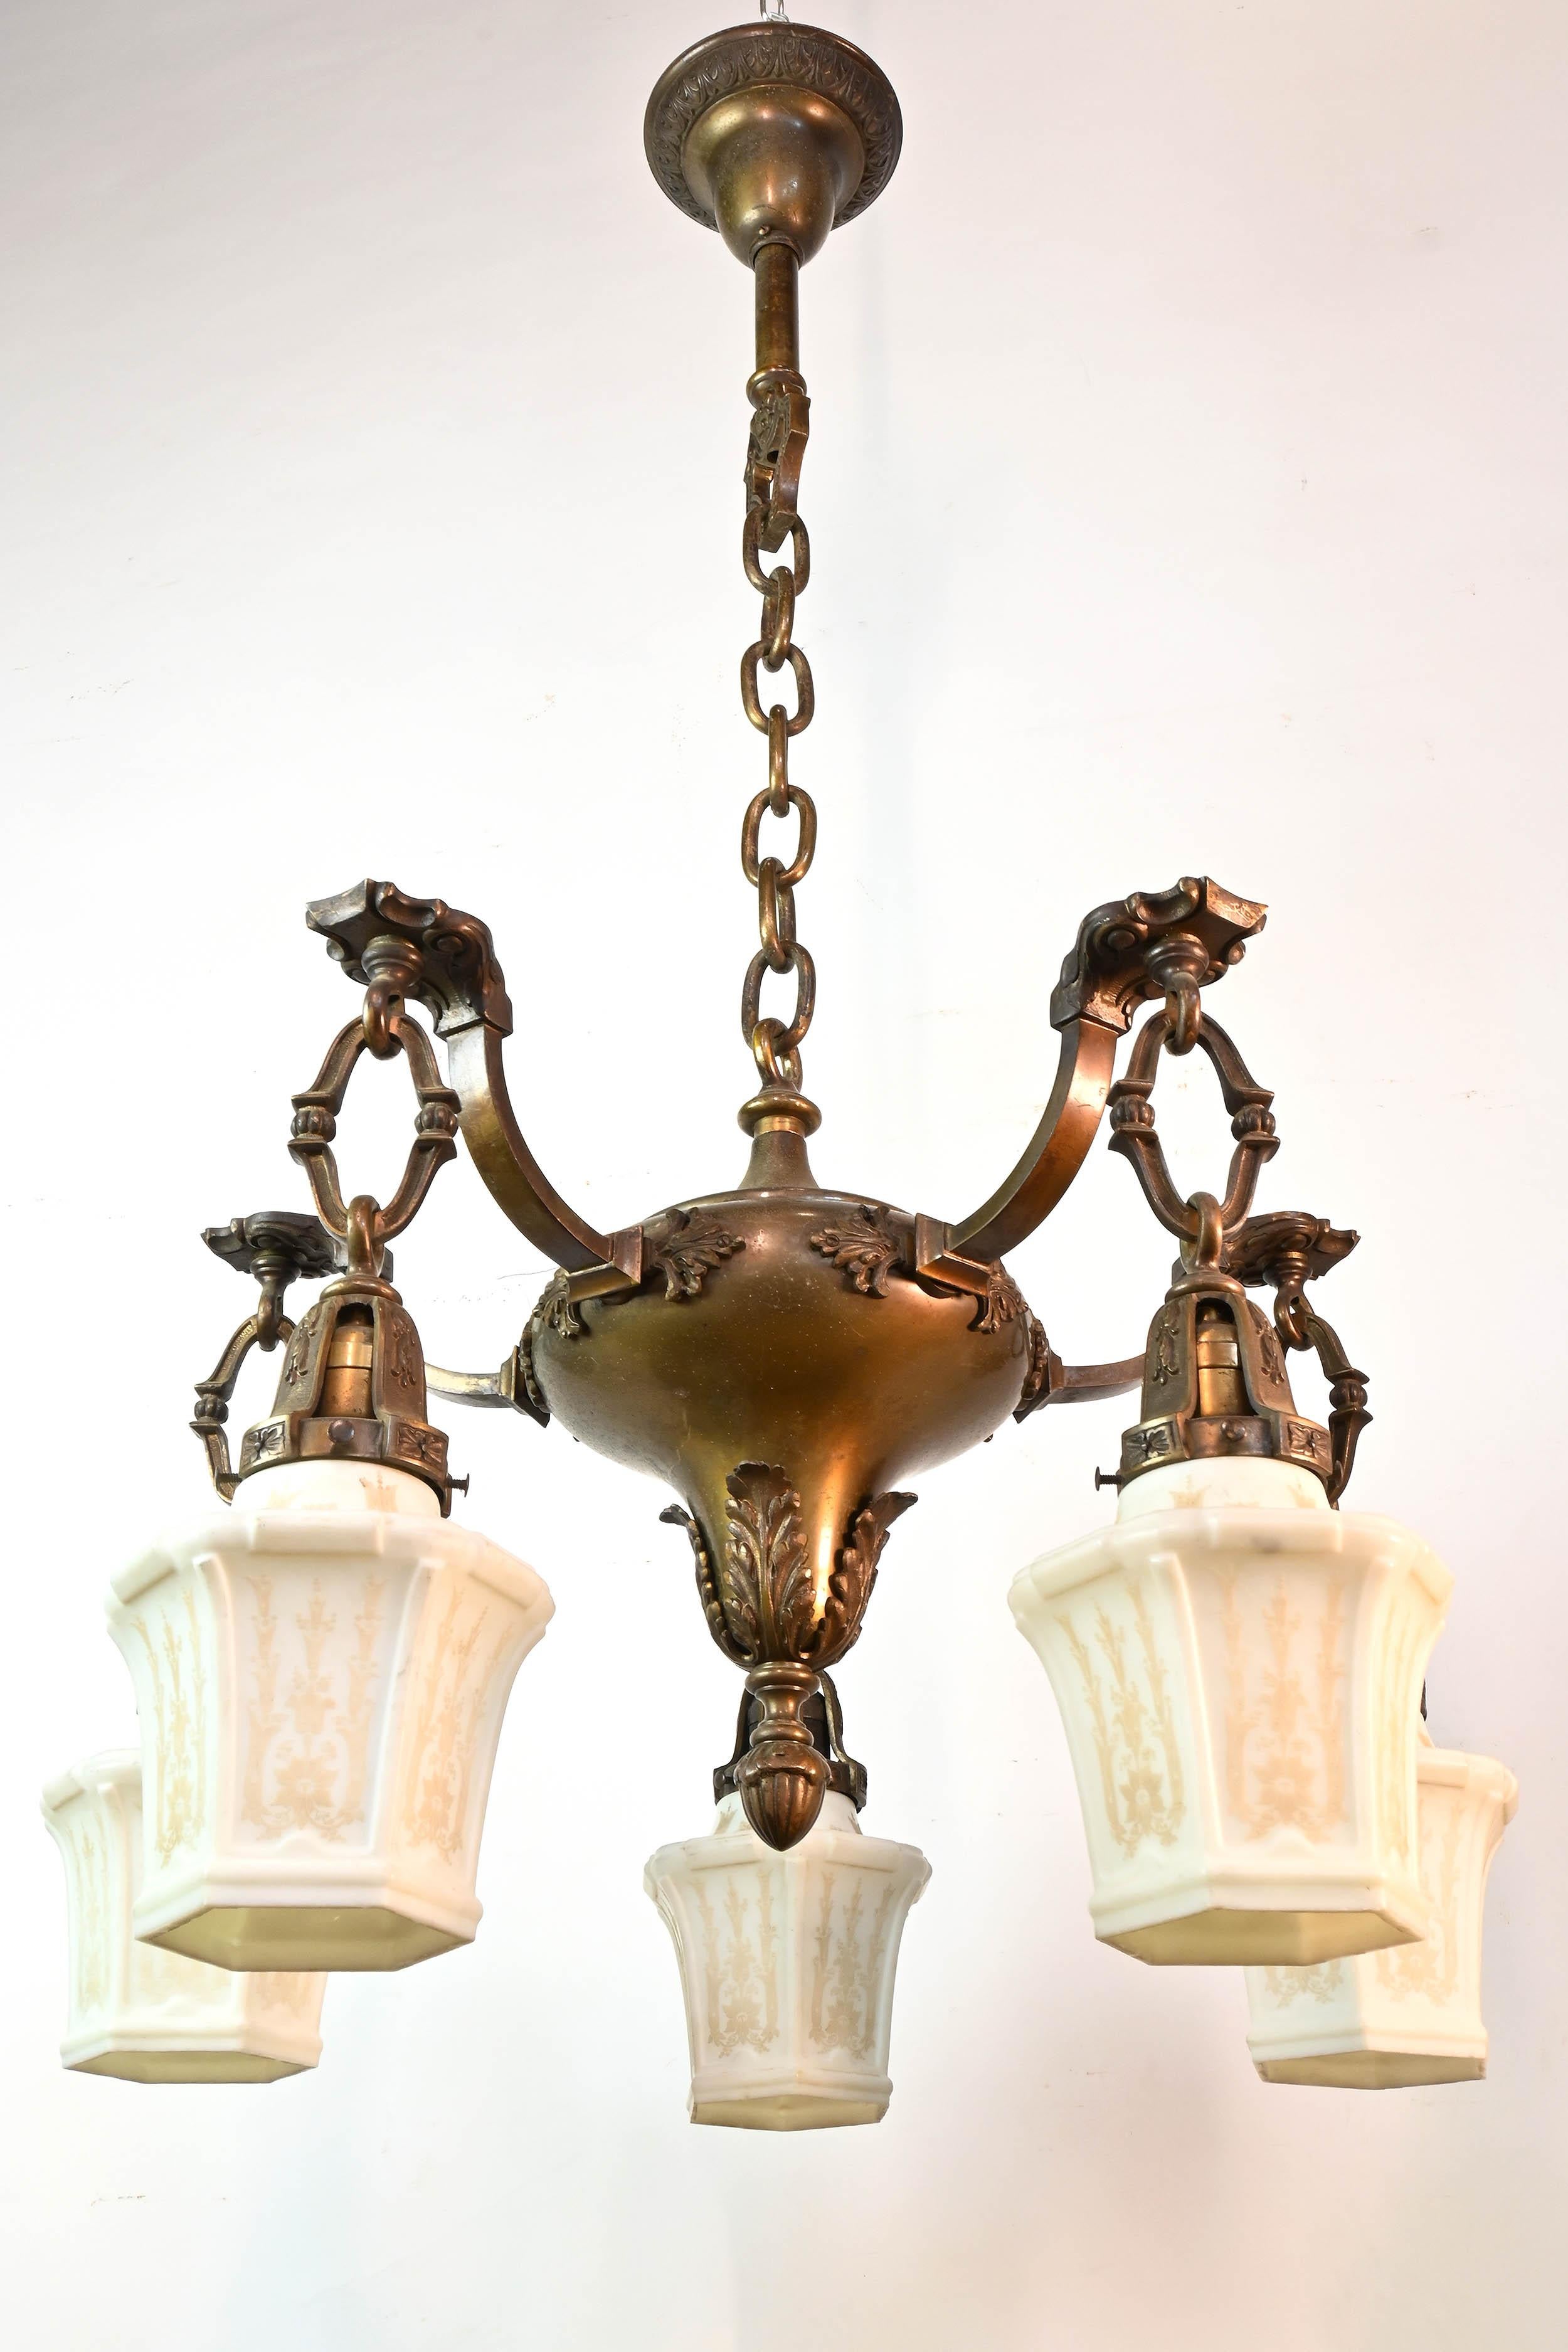 American Empire Five-Arm Cast Brass Chandelier with Original Etched Shades For Sale